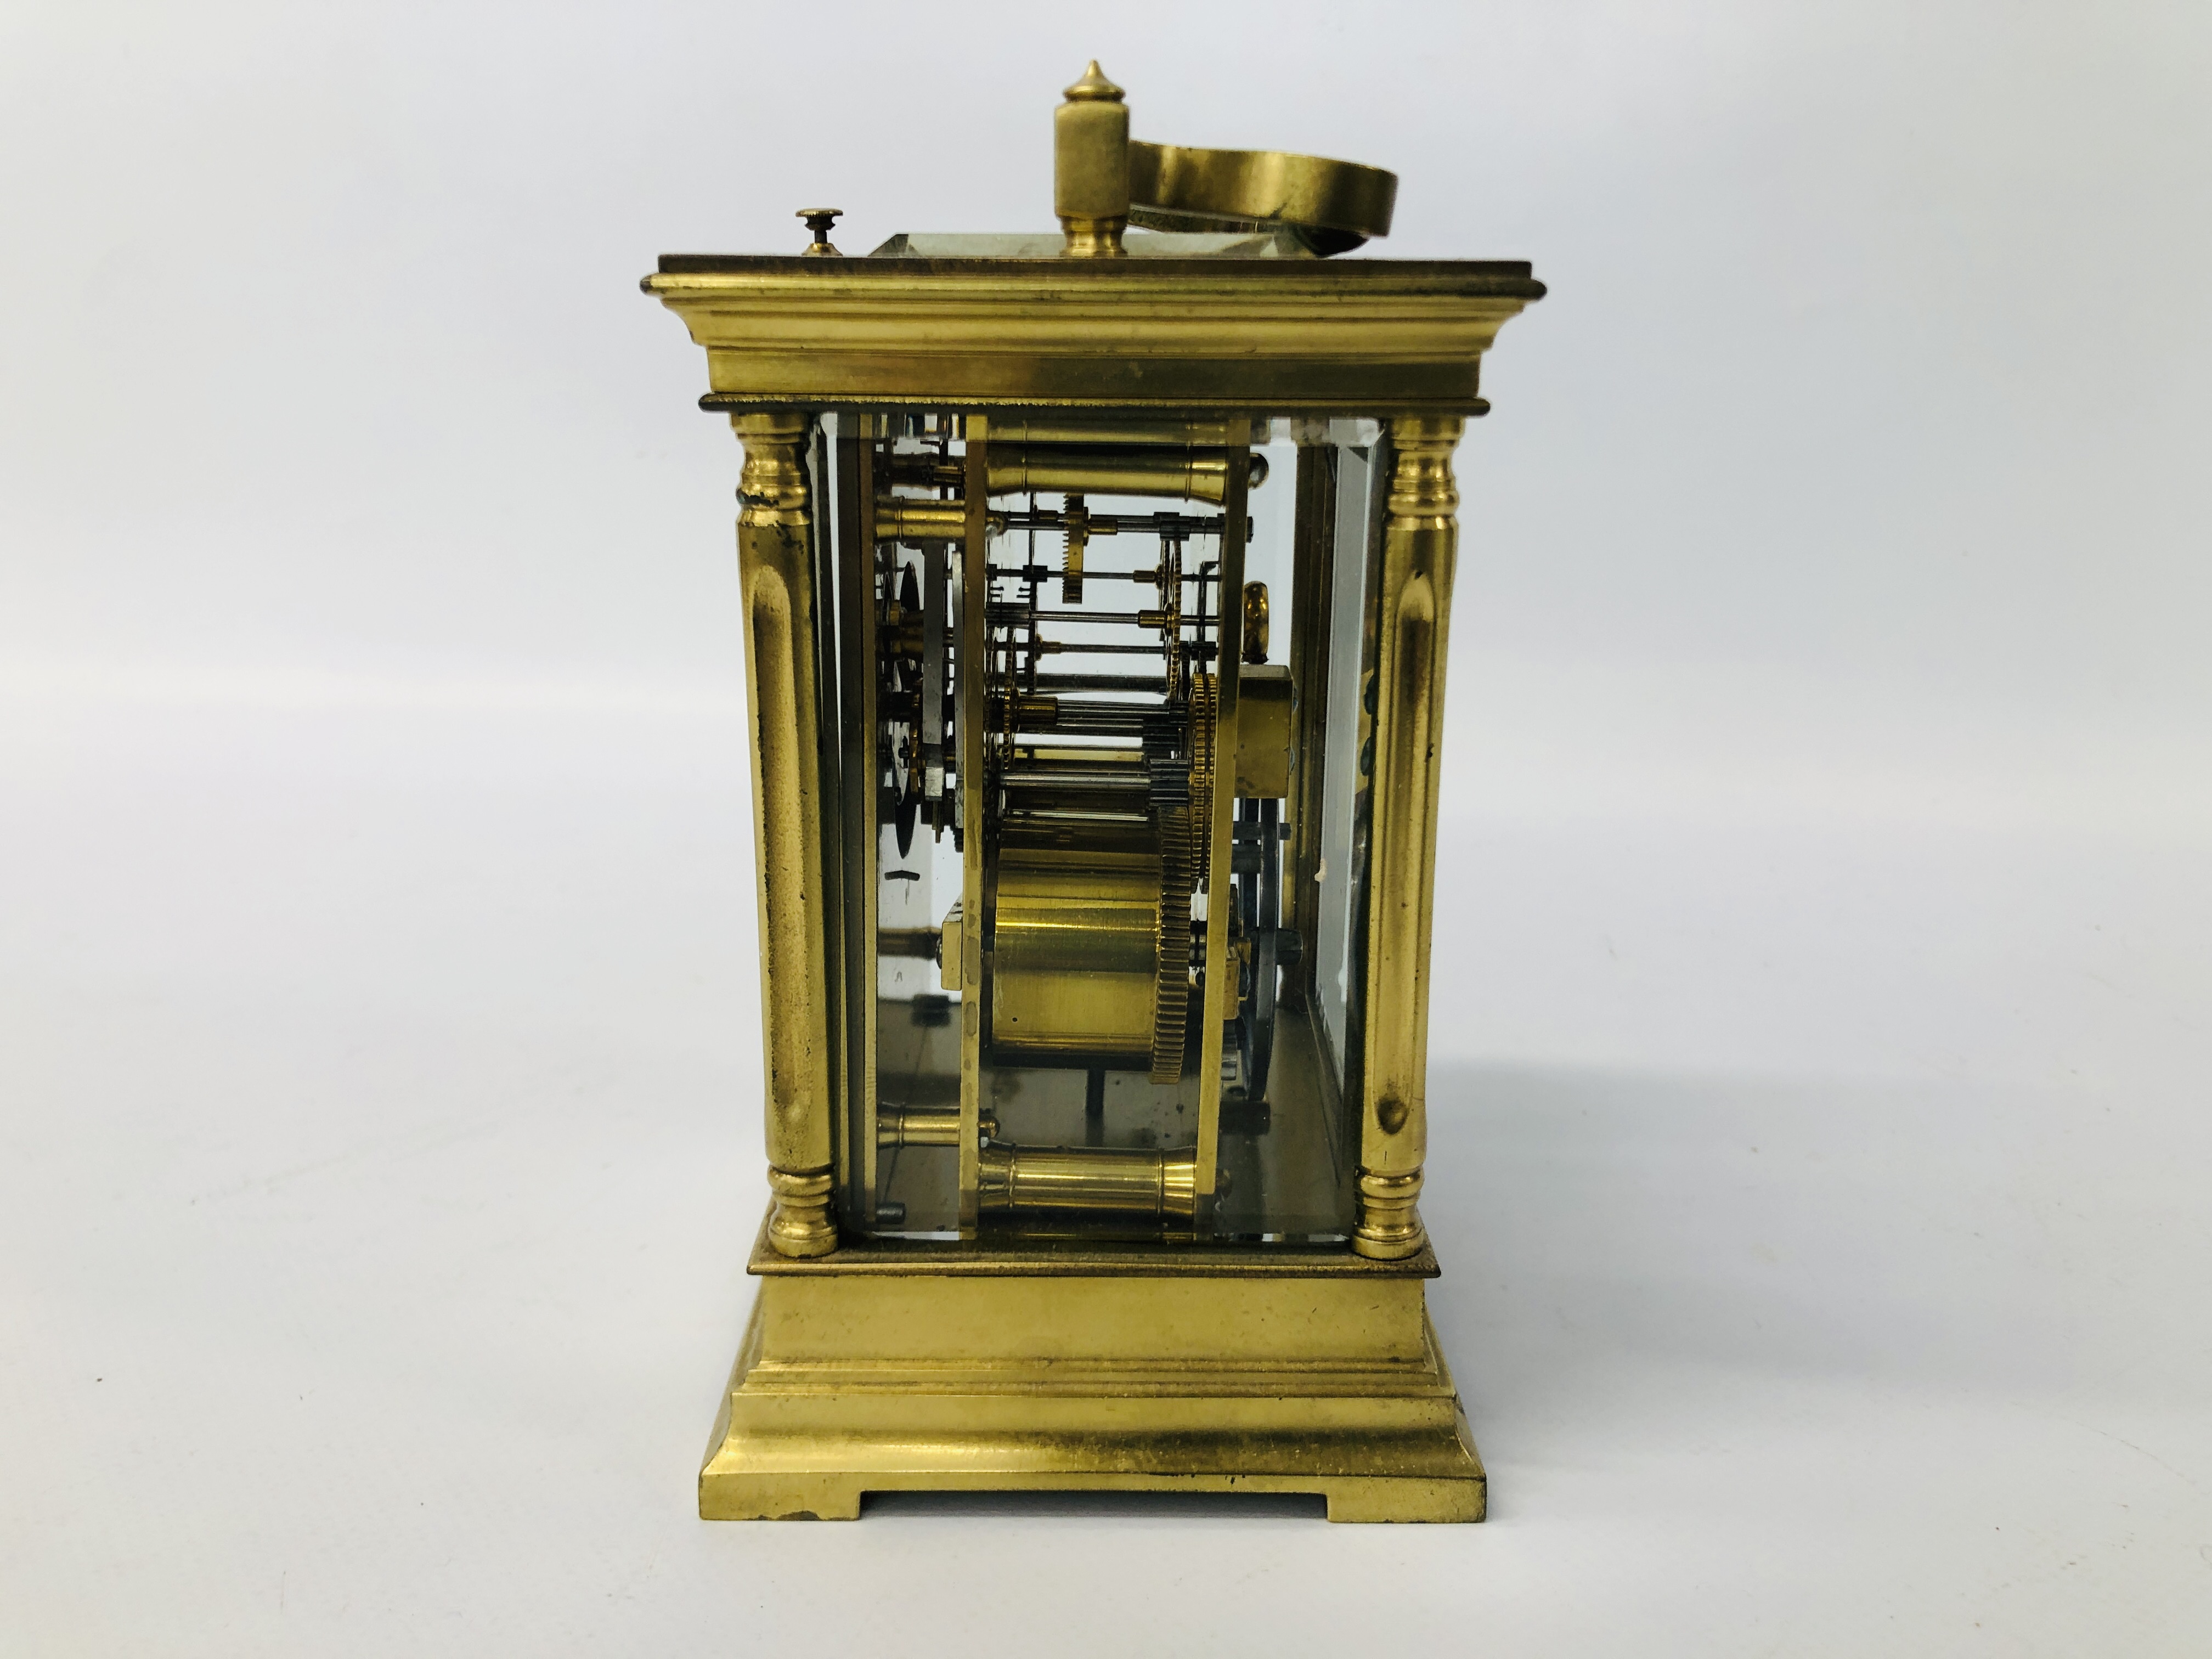 ANTIQUE BRASS CARRIDGE CLOCK WITH ENAMELLED FACE (REQUIRES ATTENTION TO THE REAR GLASS) H 14CM. - Image 4 of 9